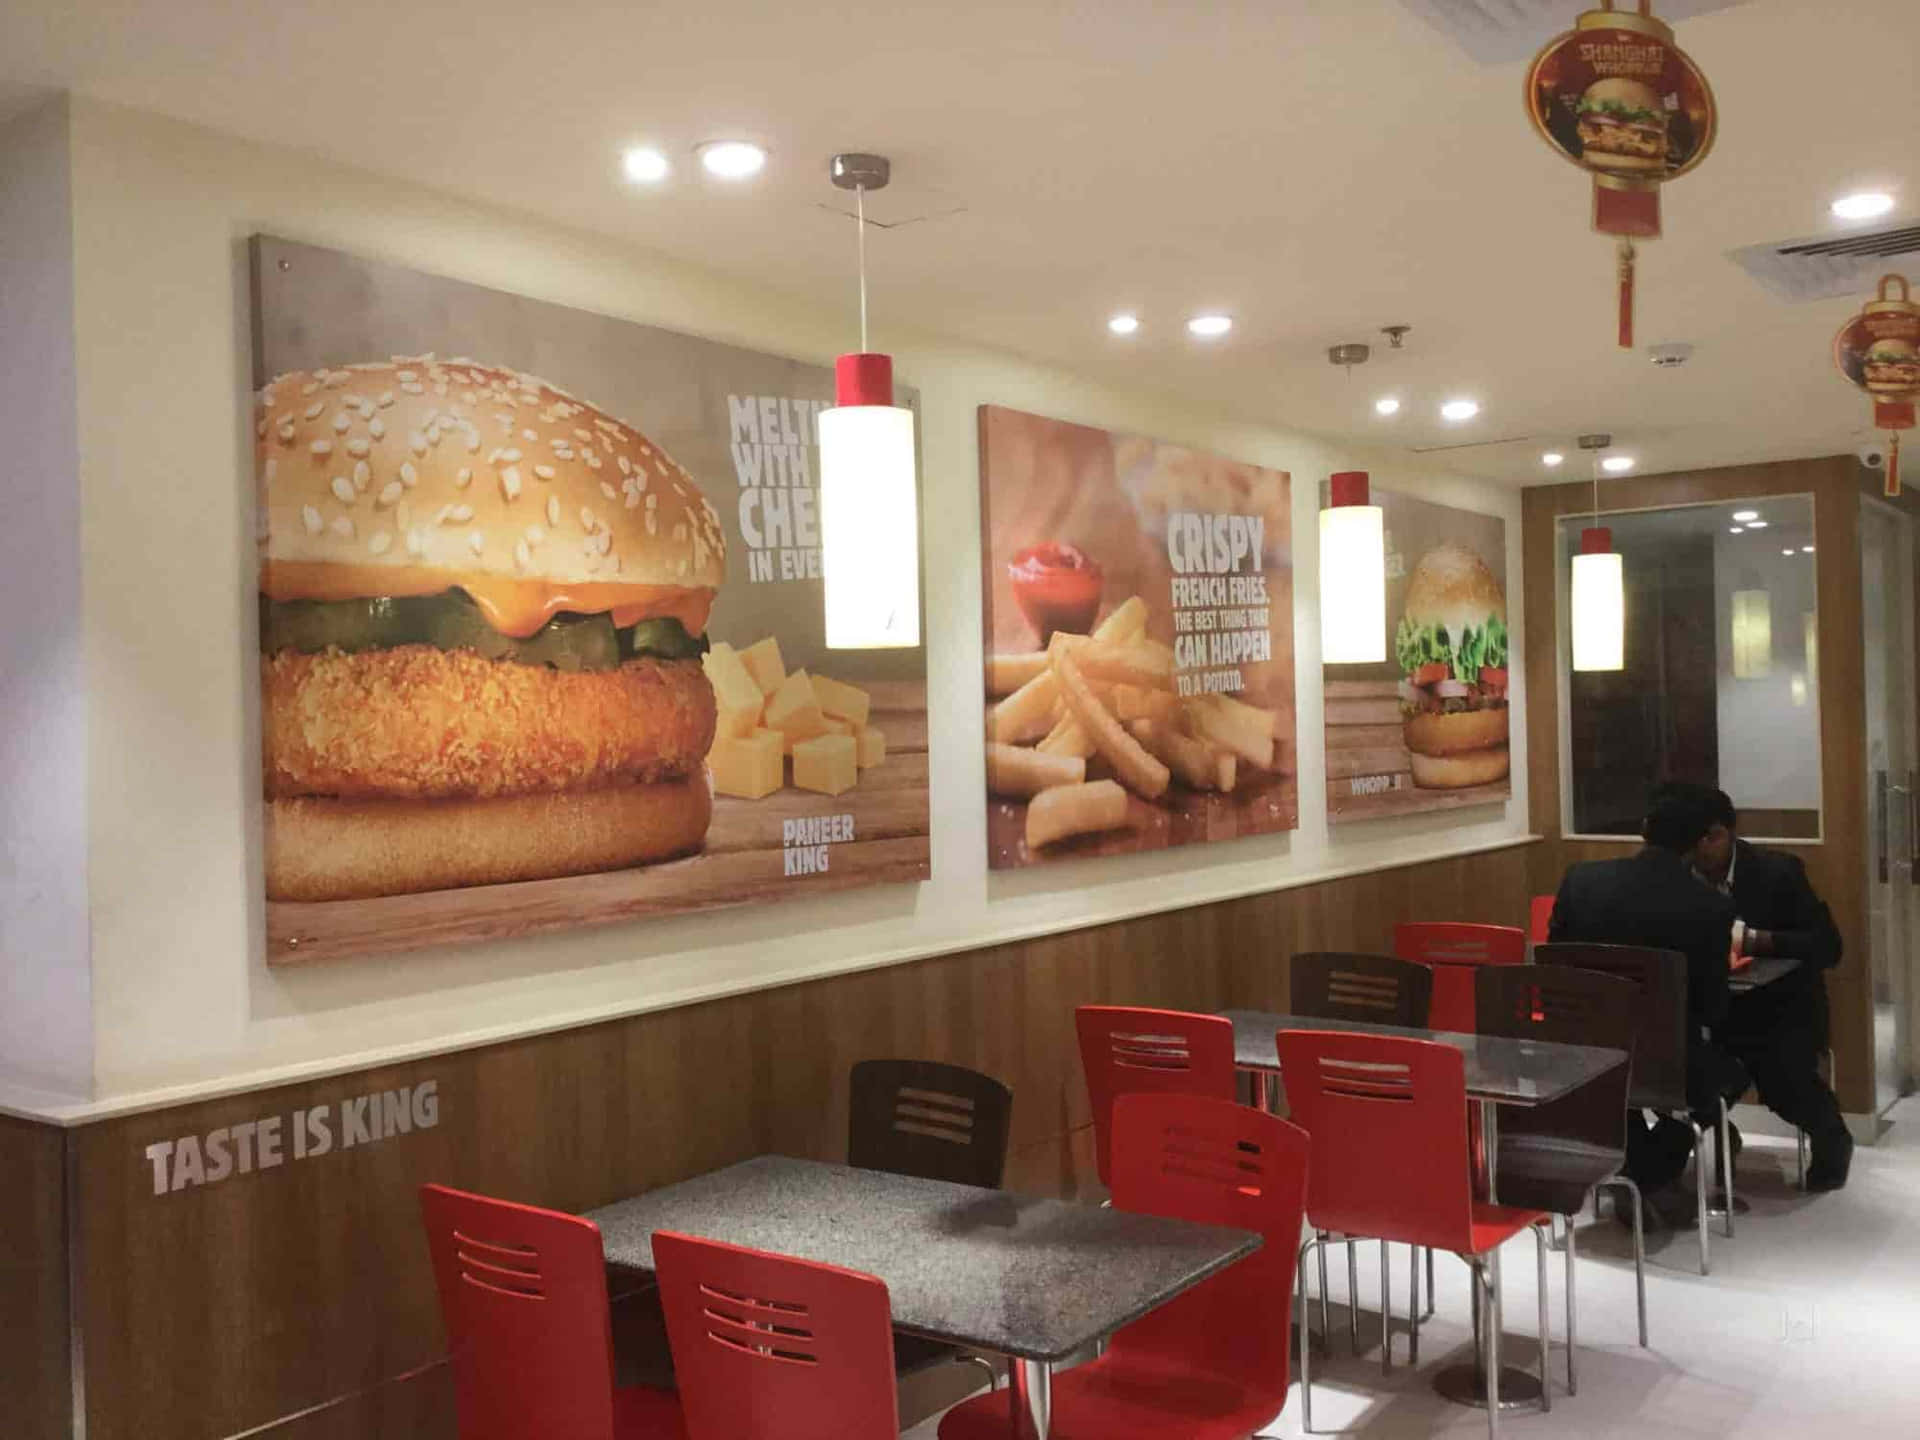 Taste the freshness and flavor of satisfaction with Burger King.